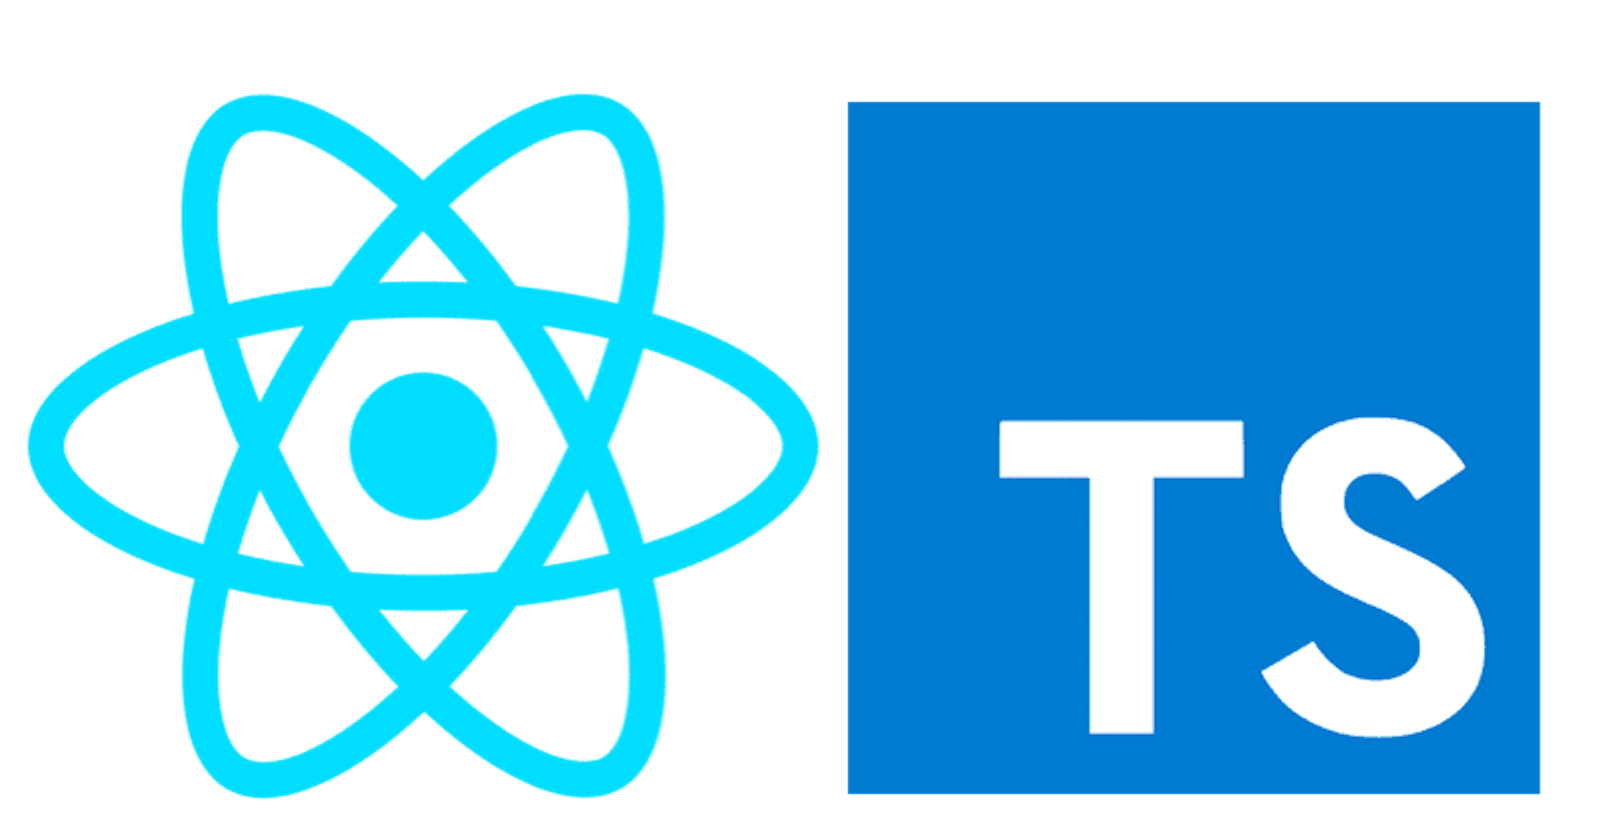 Step By Step Guide On How to convert Reactjs to Typescript For Beginners